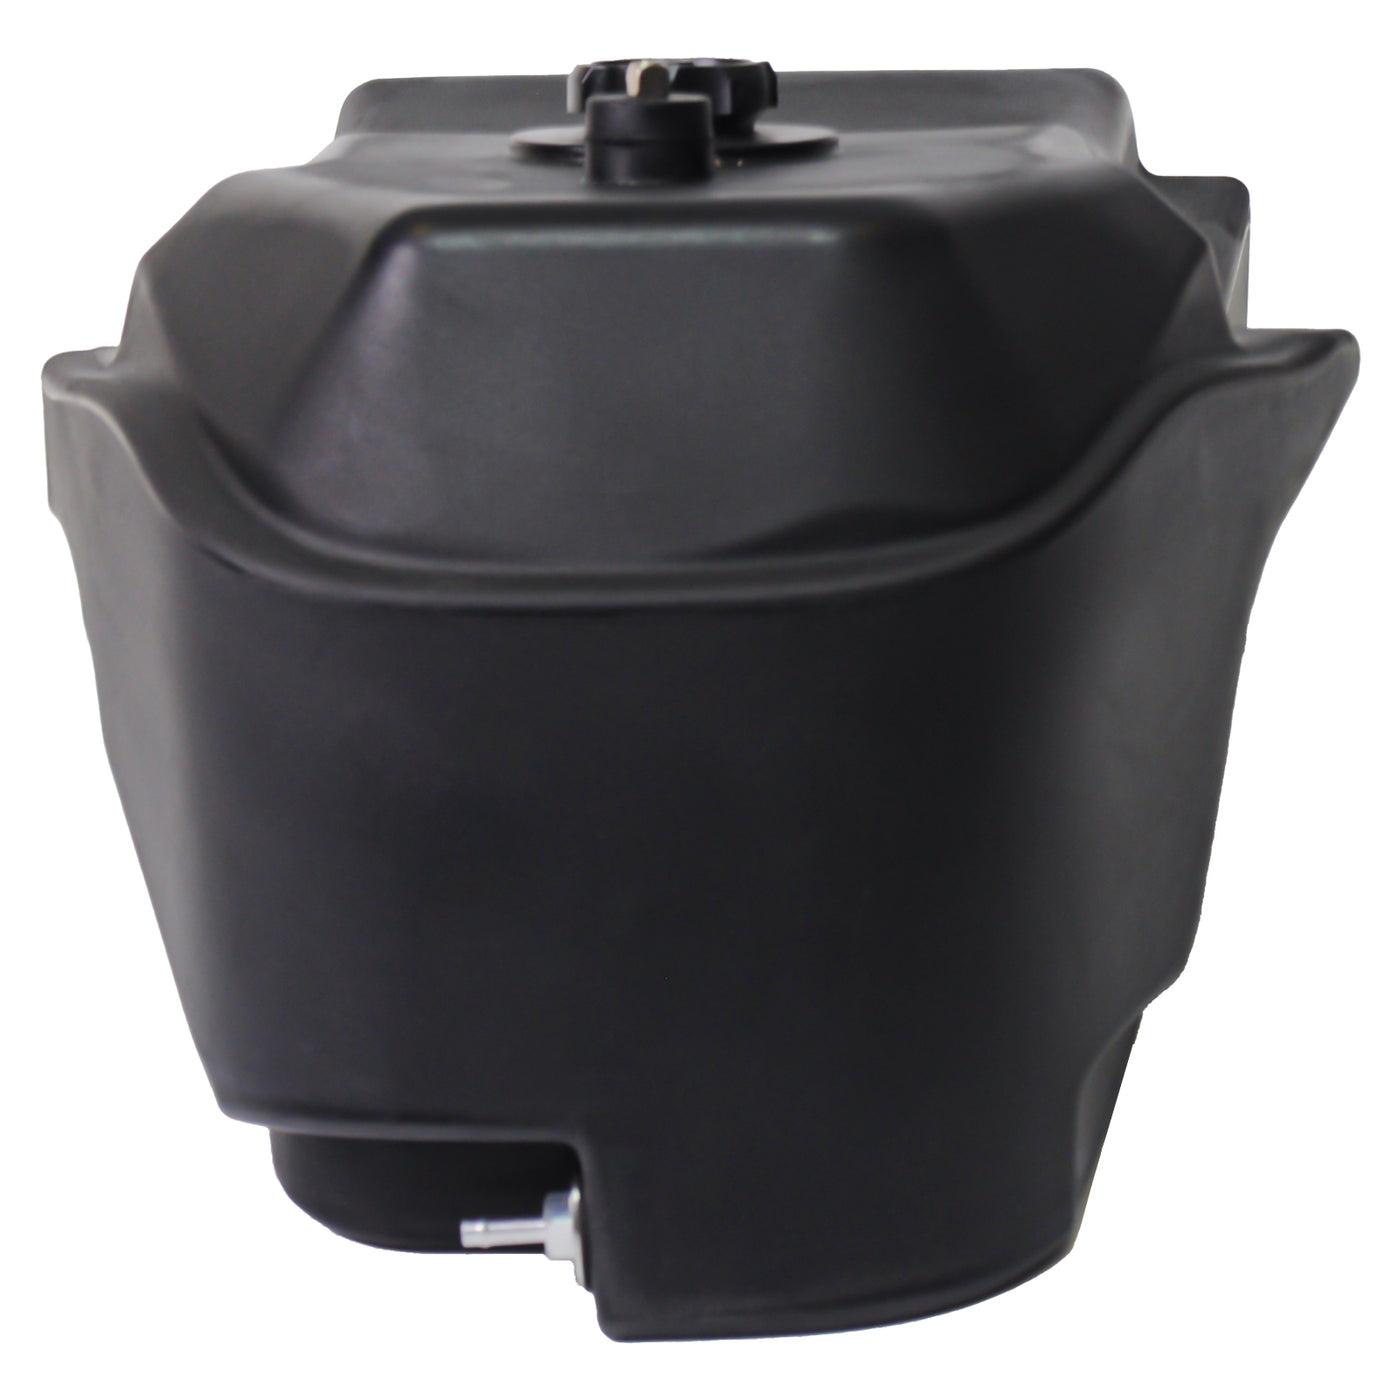 KYMCO Motorcycle Auxiliary Fuel Tank Made of PE Material for Rowing S350 (17.32x12.20x11.81 inches, 13L)